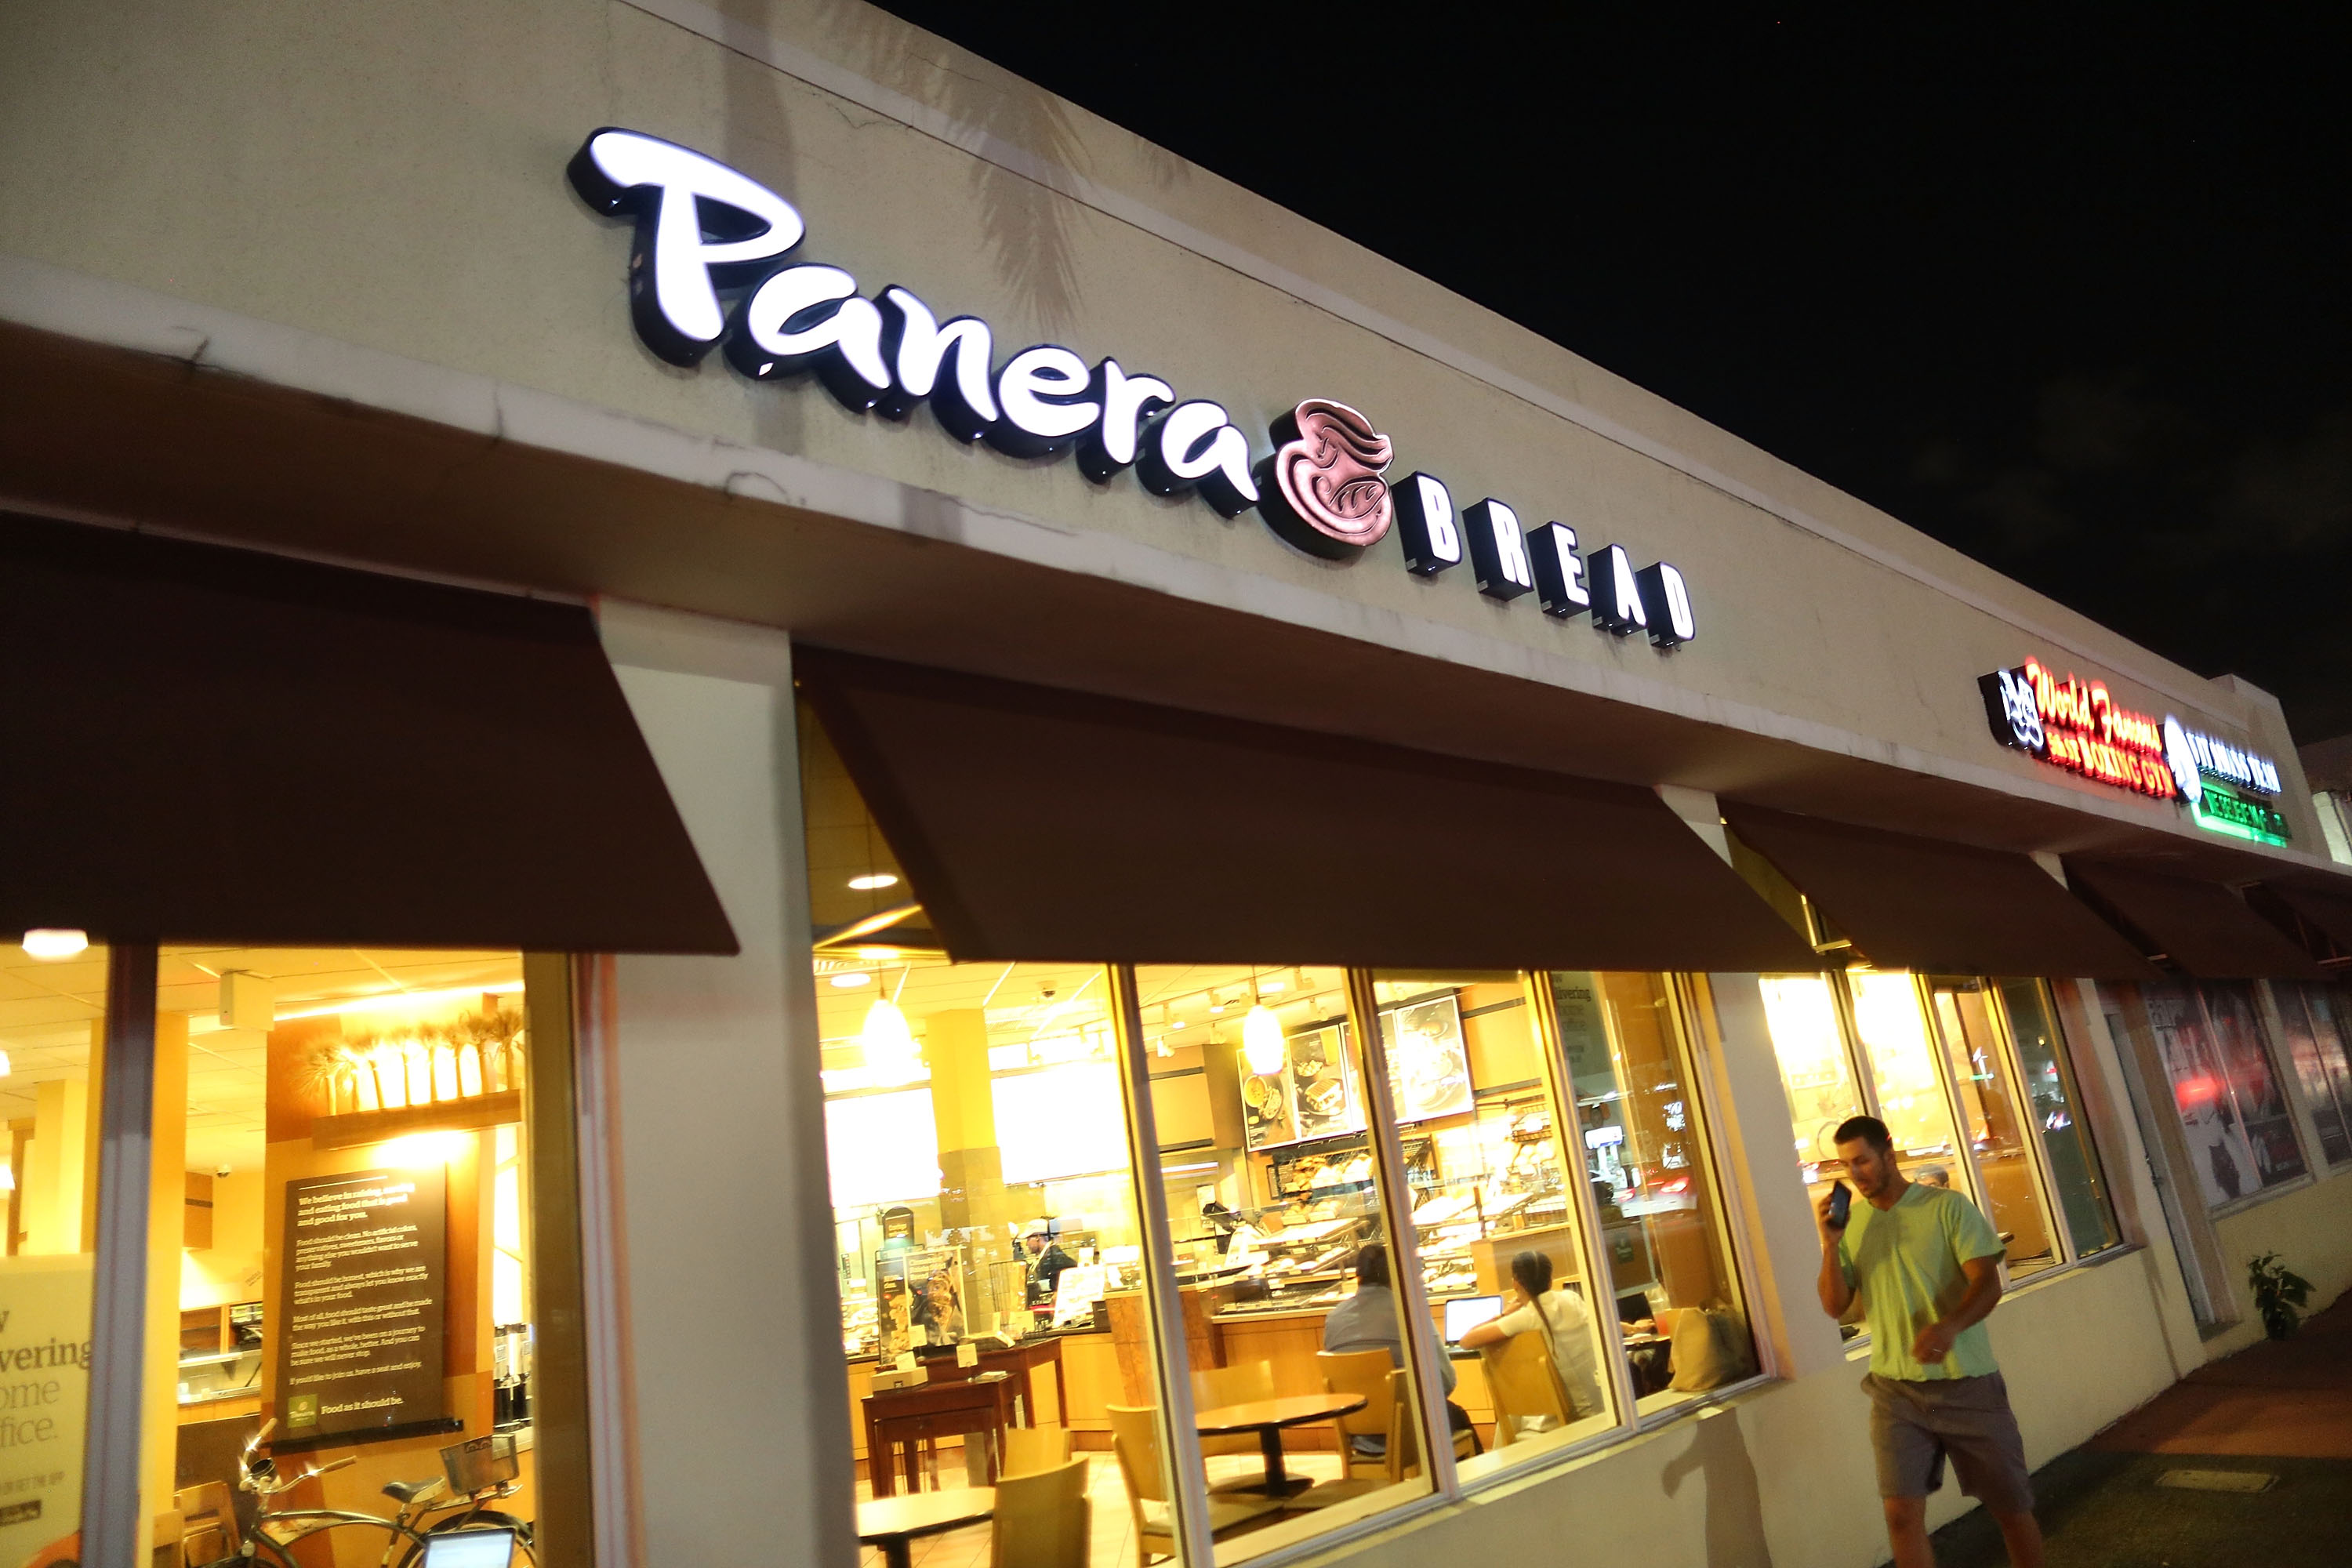 A Panera Bread restaurant is seen on the day it is announced that the Panera Bread company is acquiring sandwich rival Au Bon Pain on November 8, 2017 in Miami Beach, Florida. (Joe Raedle—Getty Images)